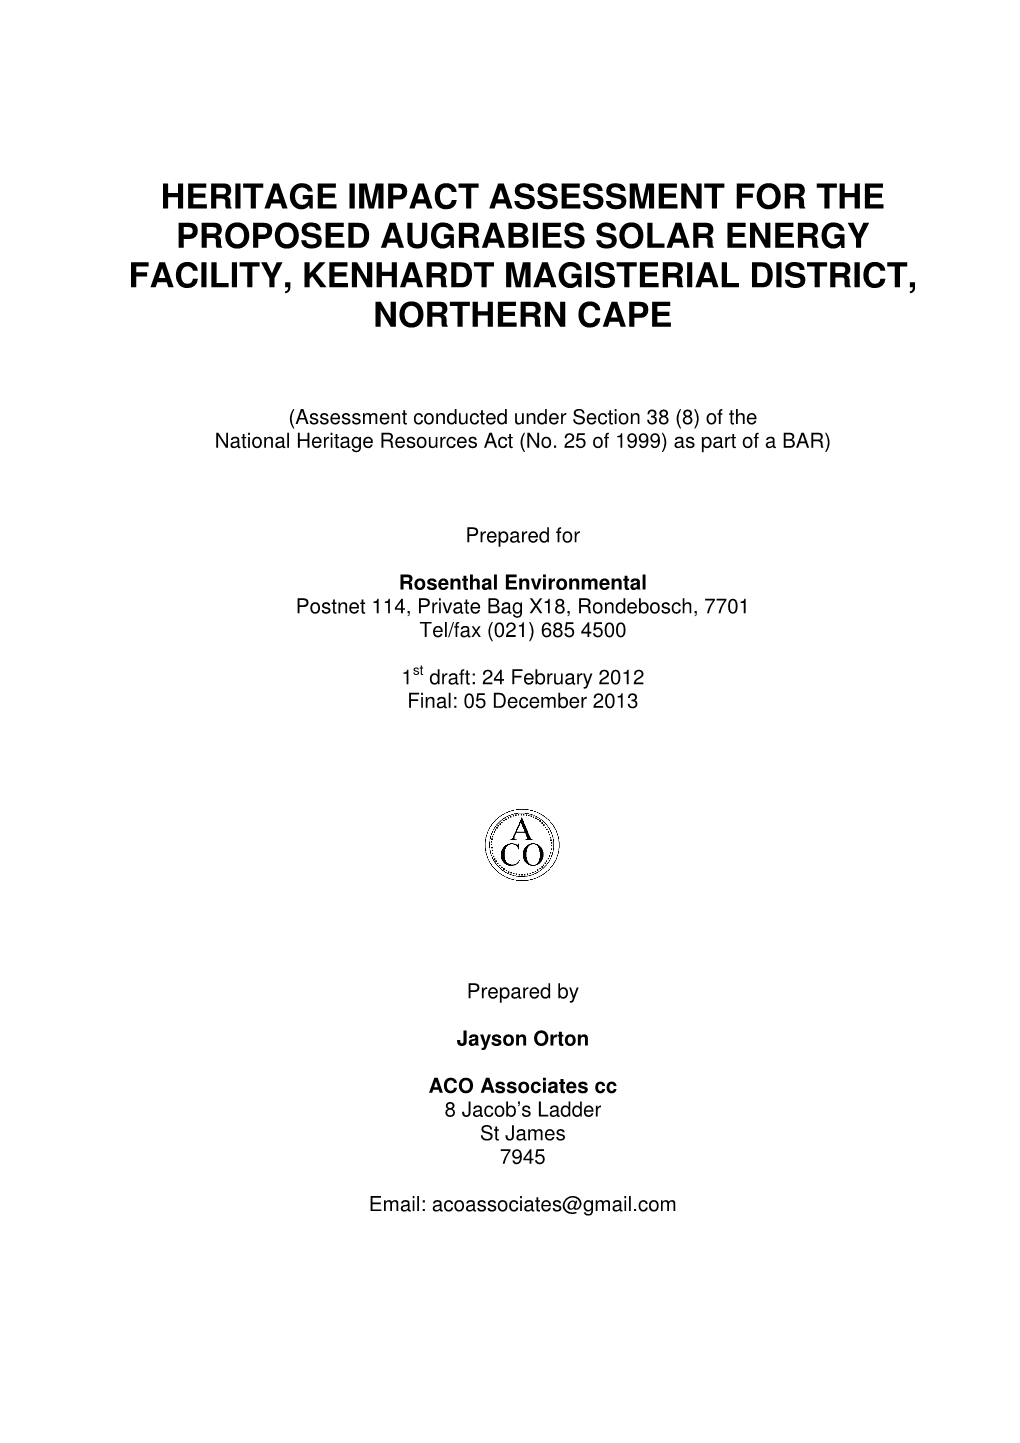 Heritage Impact Assessment for the Proposed Augrabies Solar Energy Facility, Kenhardt Magisterial District, Northern Cape